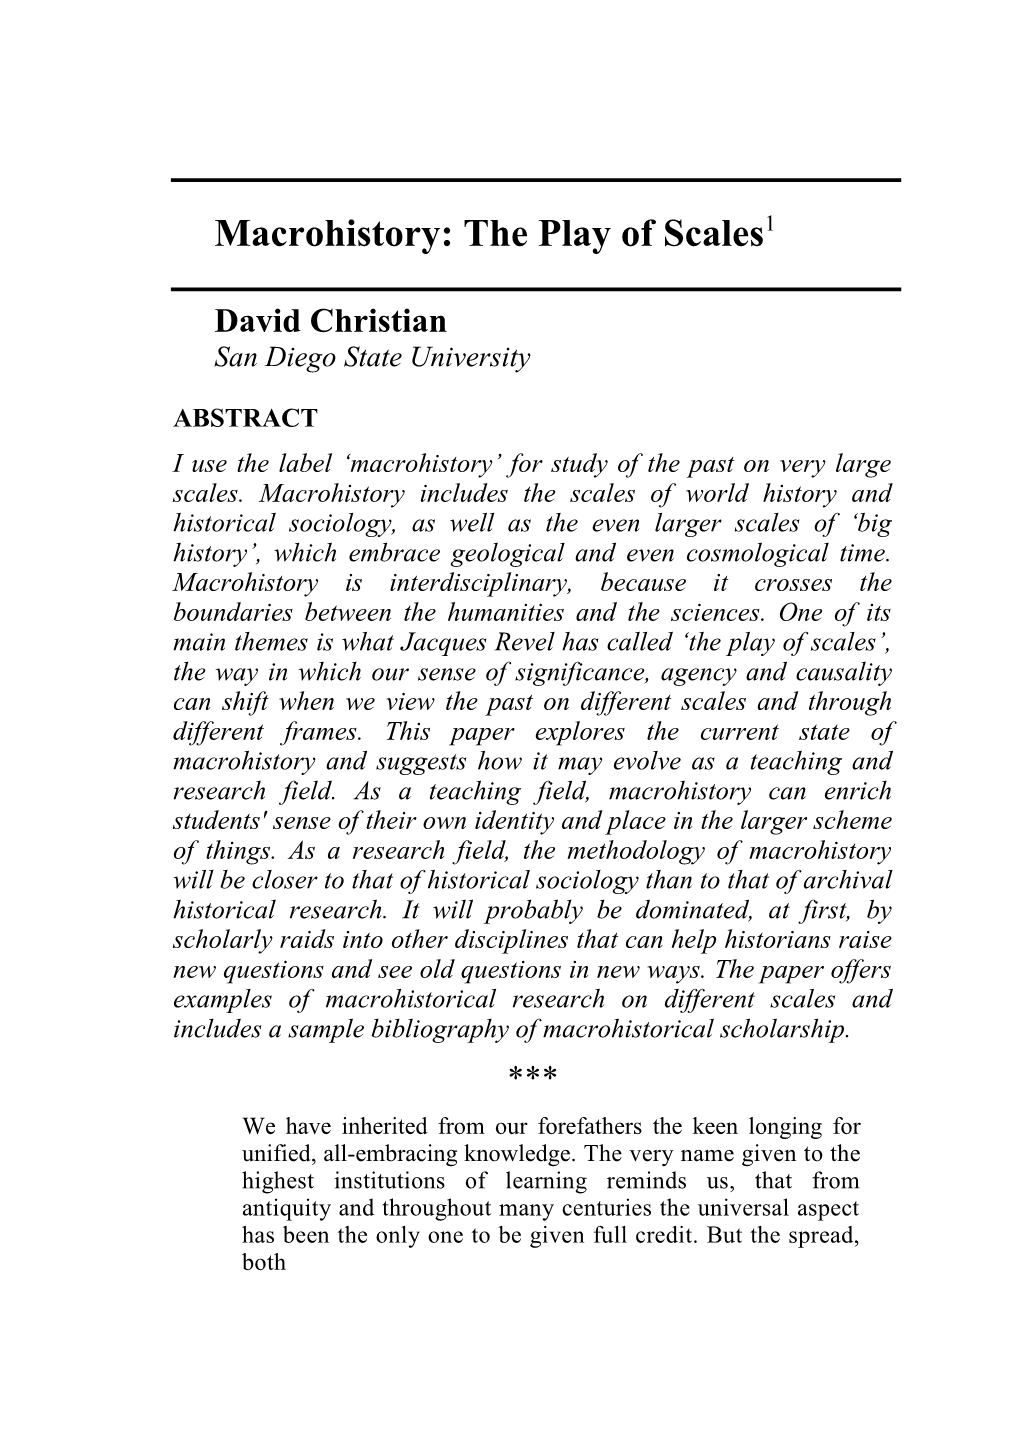 Macrohistory: the Play of Scales1